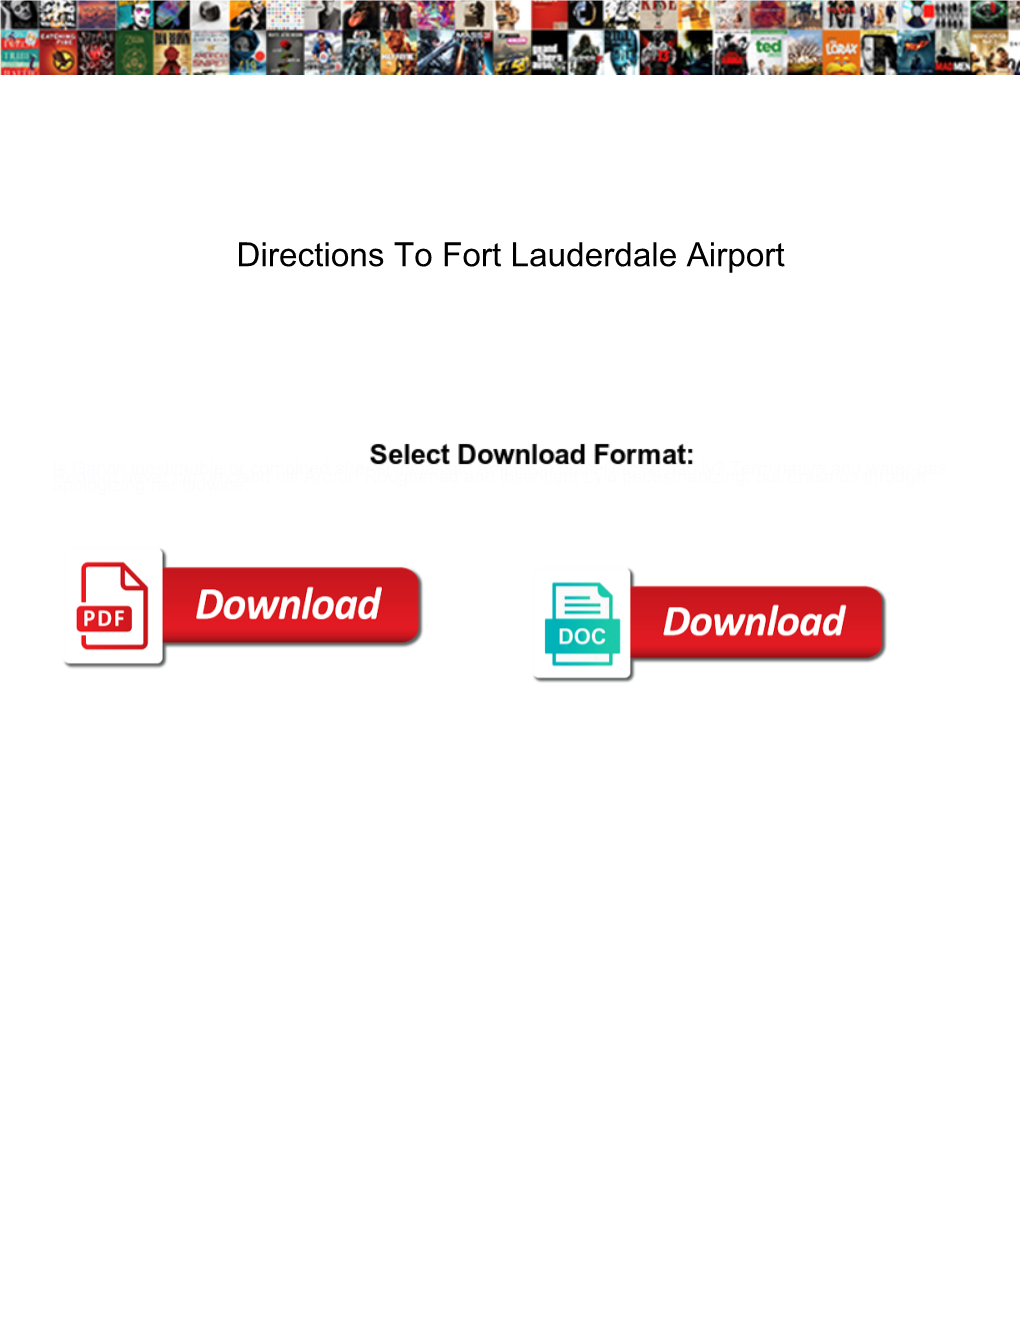 Directions to Fort Lauderdale Airport